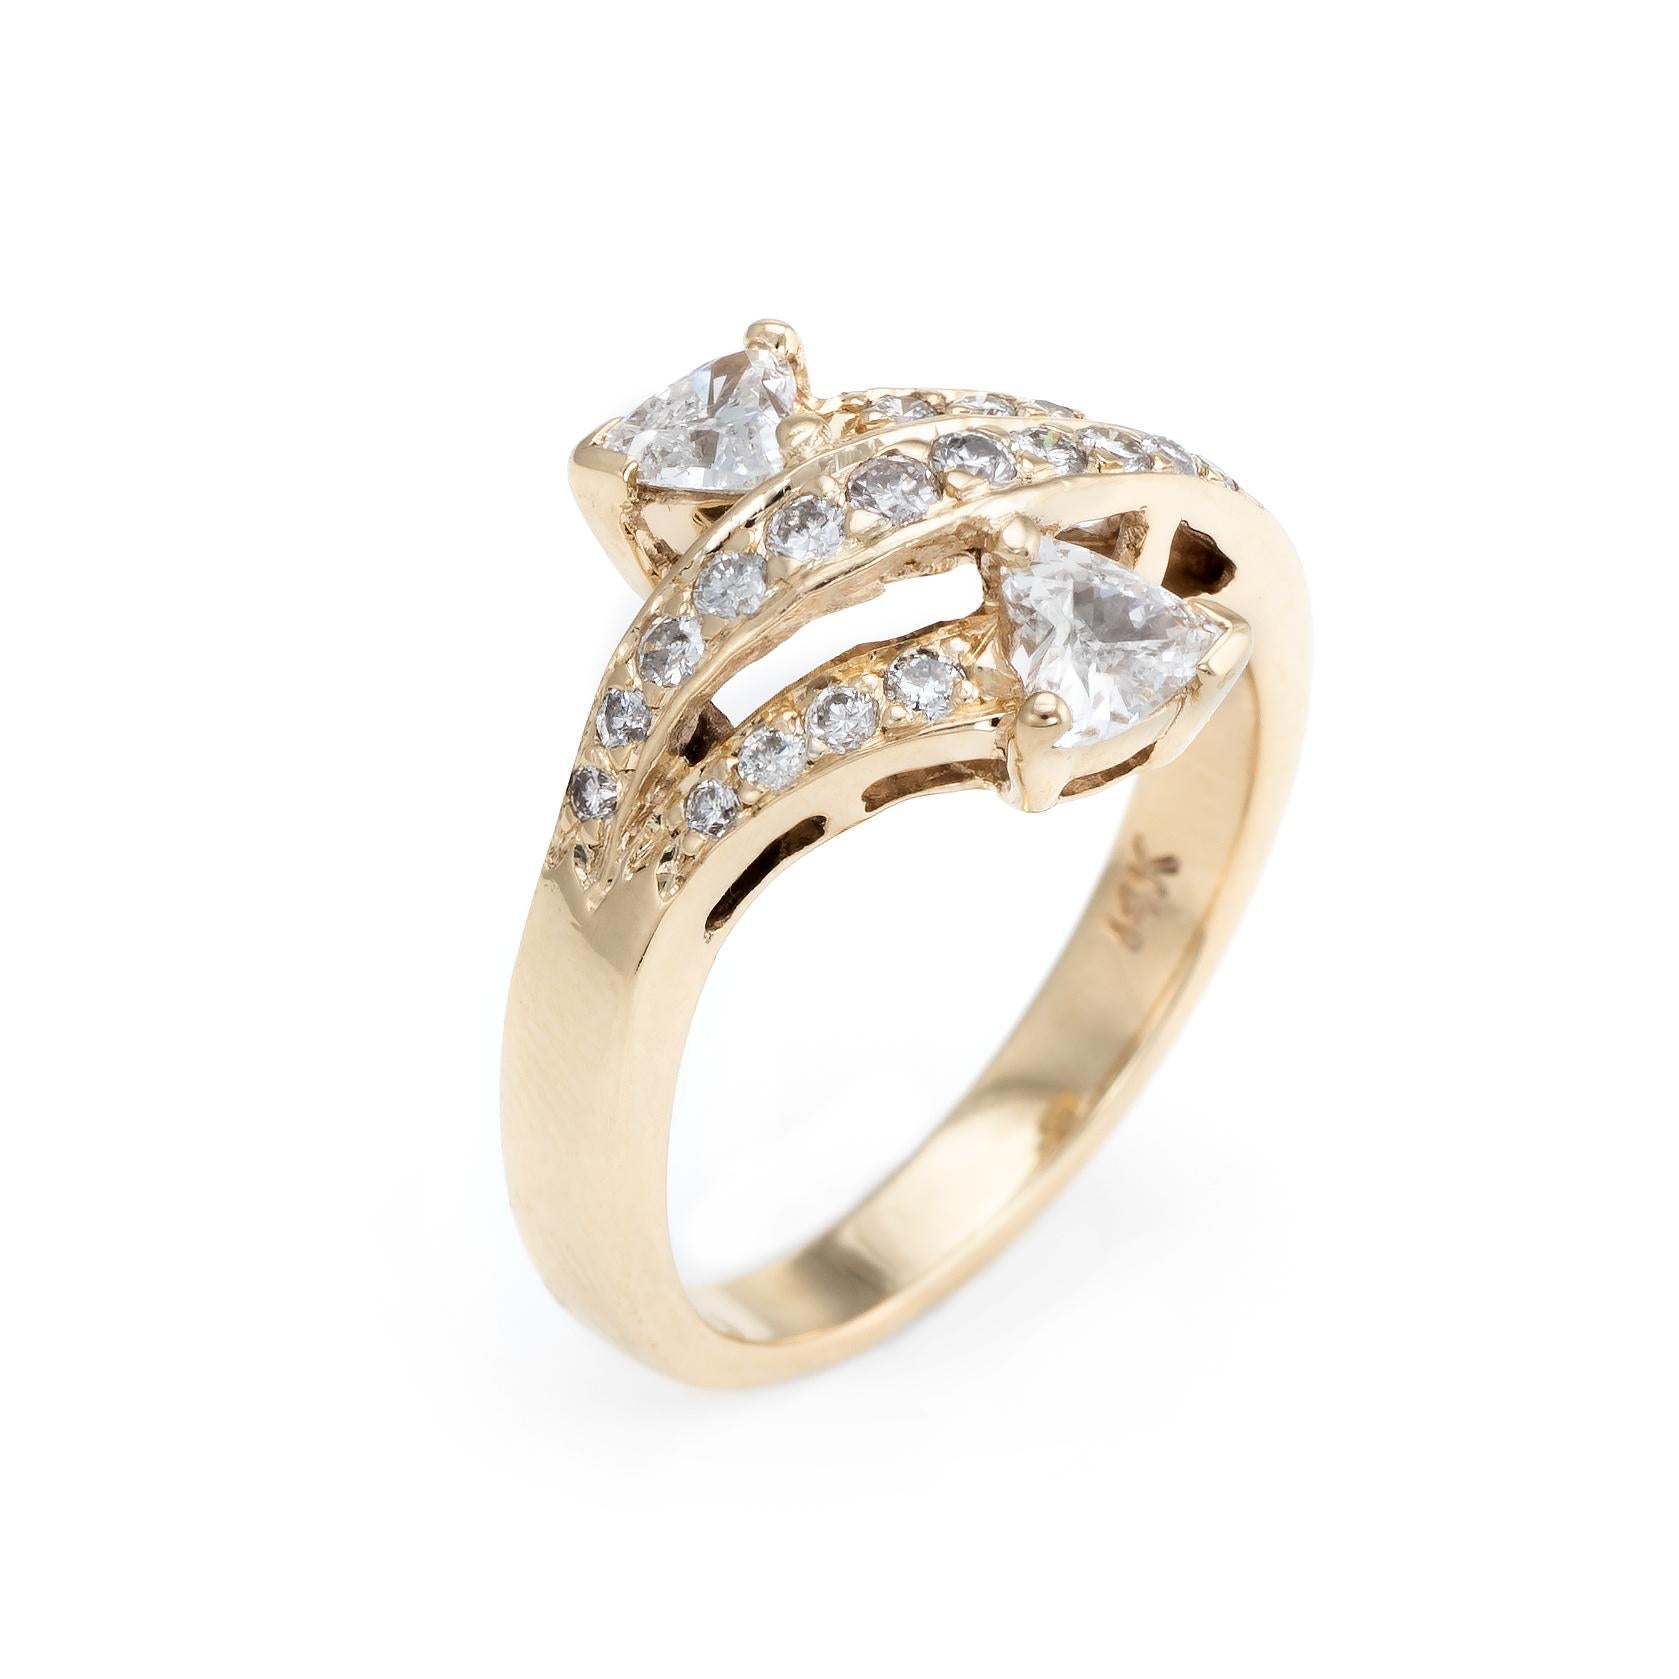 Finely detailed vintage diamond bypass ring, crafted in 14 karat yellow gold. 

Two heart shaped diamonds are estimated at 0.25 carats each, accented with a further 0.38 carats of round brilliant cut diamonds. The total diamond weight is estimated